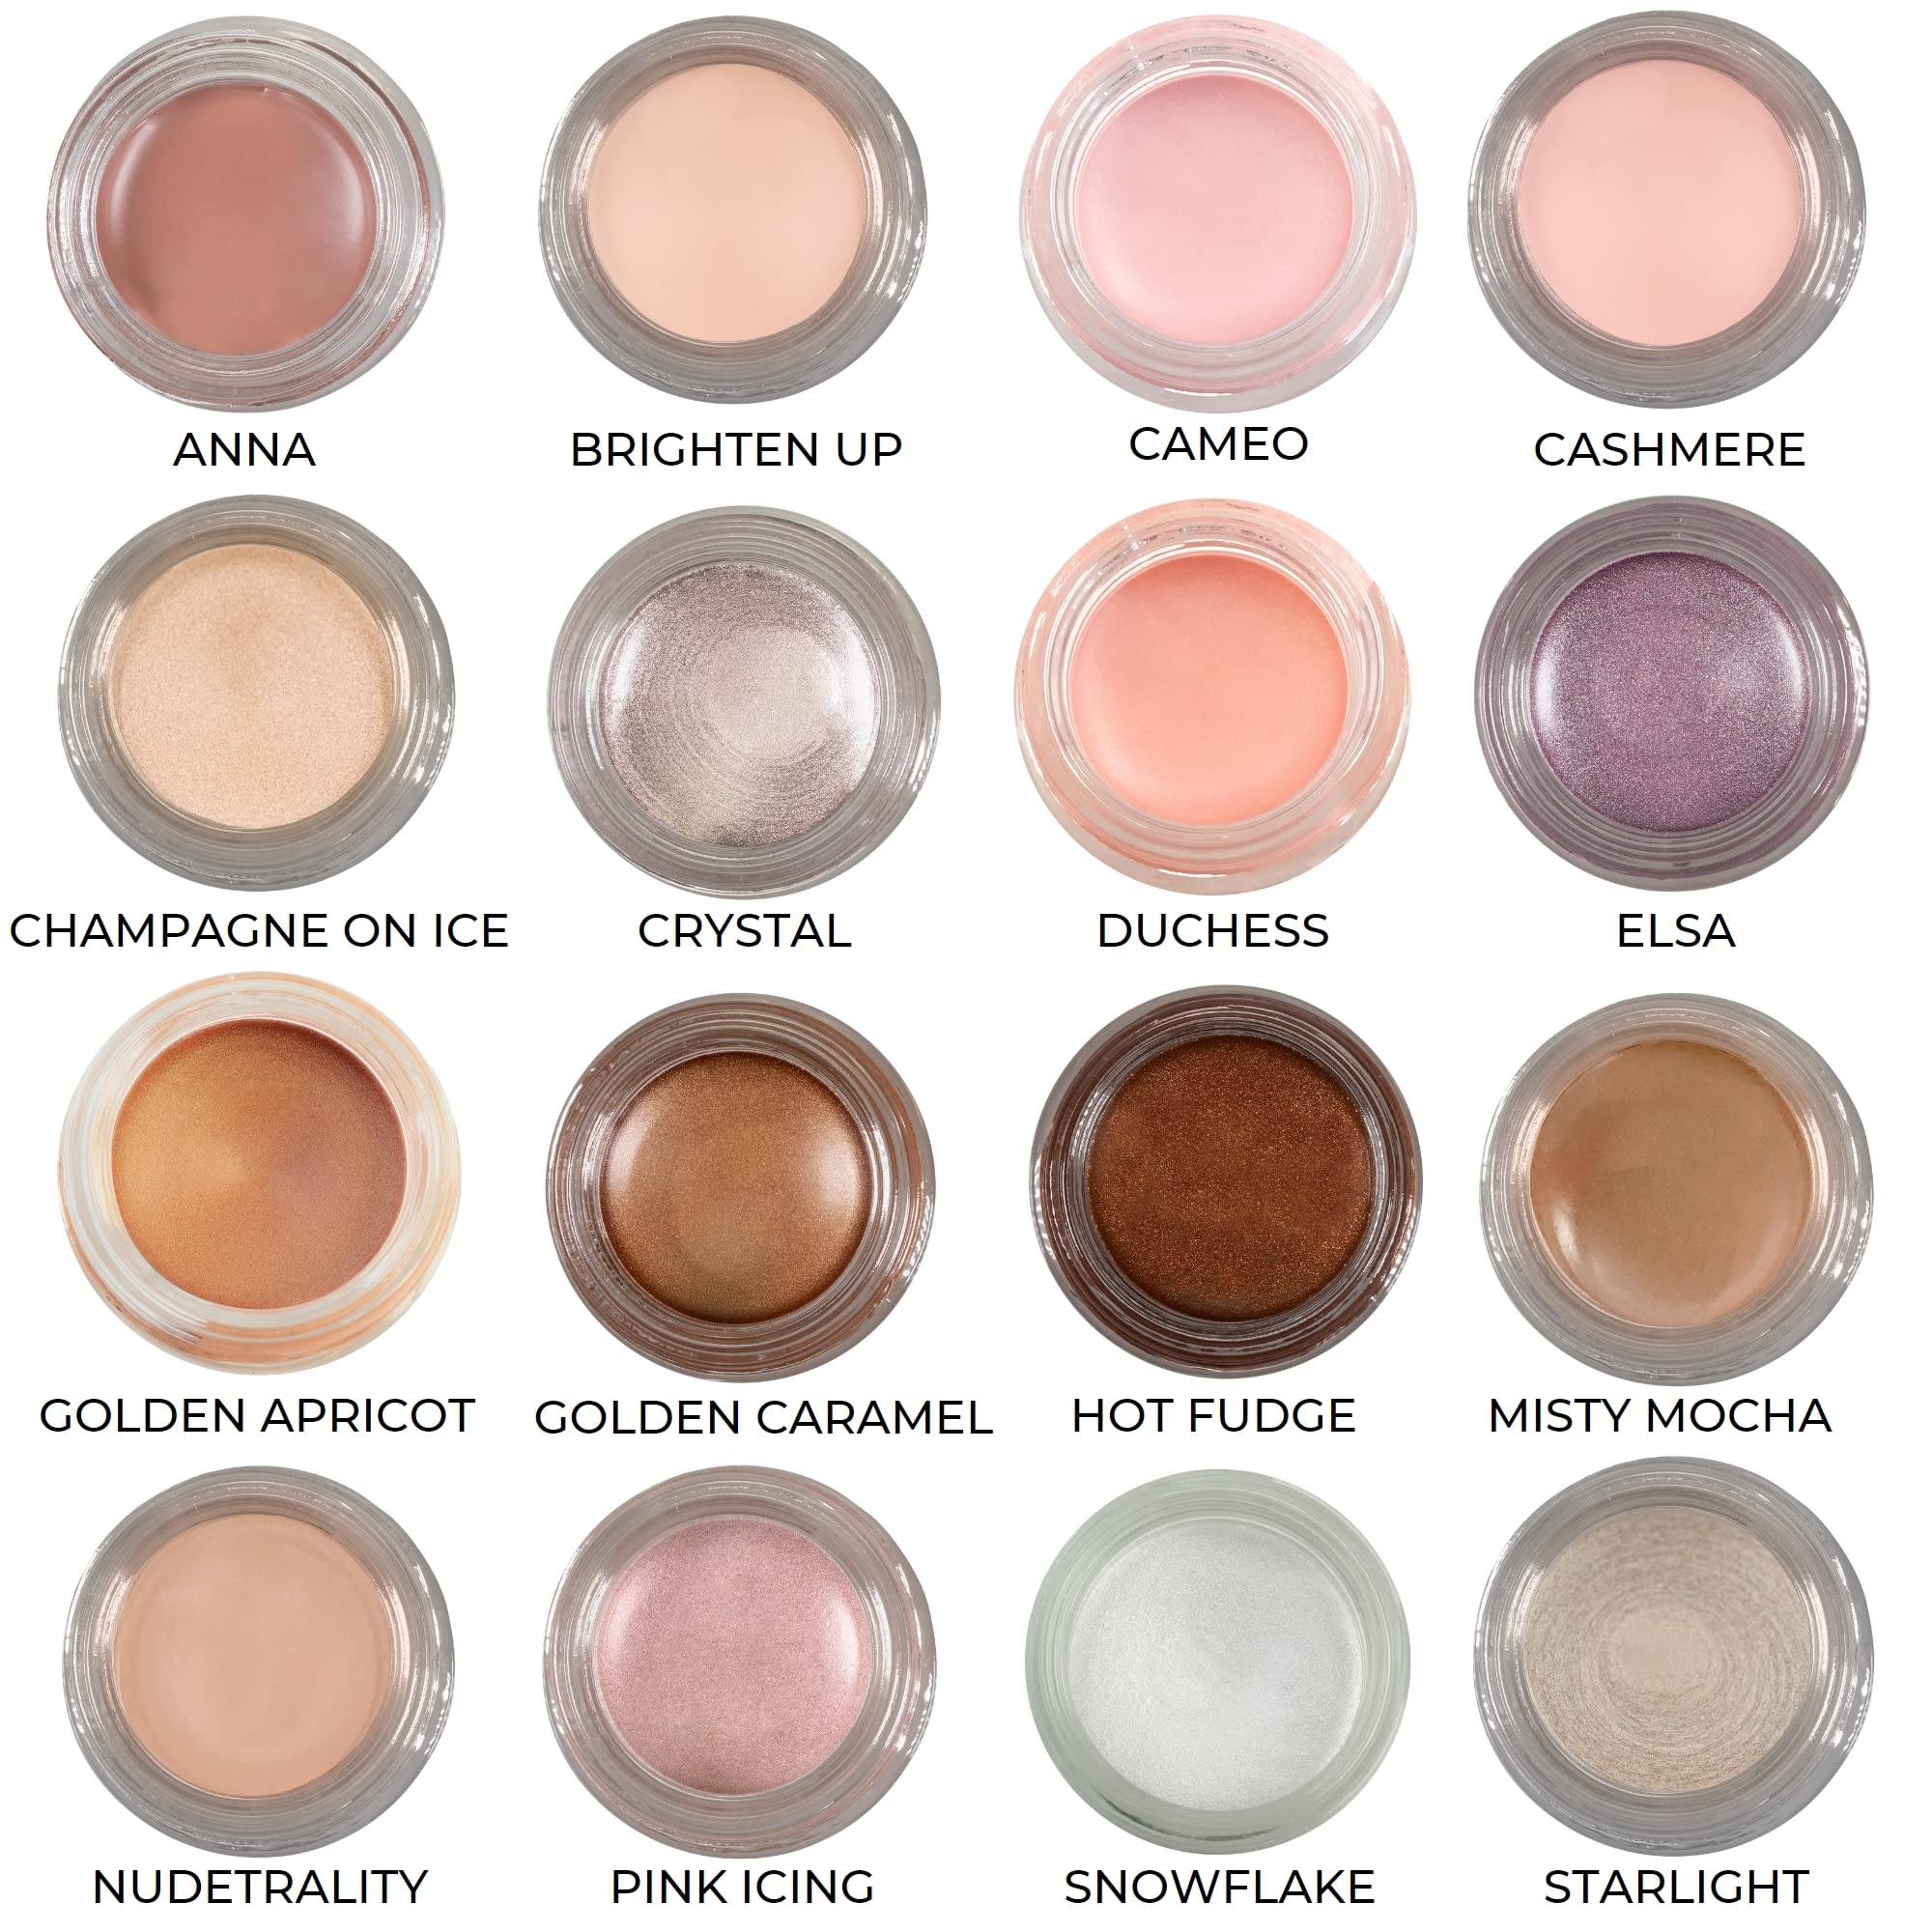 Mommy Makeup Any Wear Creme in Brighten Up (a Warm Matte Cream) - The ultimate multi-tasking cosmetic - Smudge-proof Eye Shadow, Cheek Color, and Lip Color all-in-one [Brighten Up]